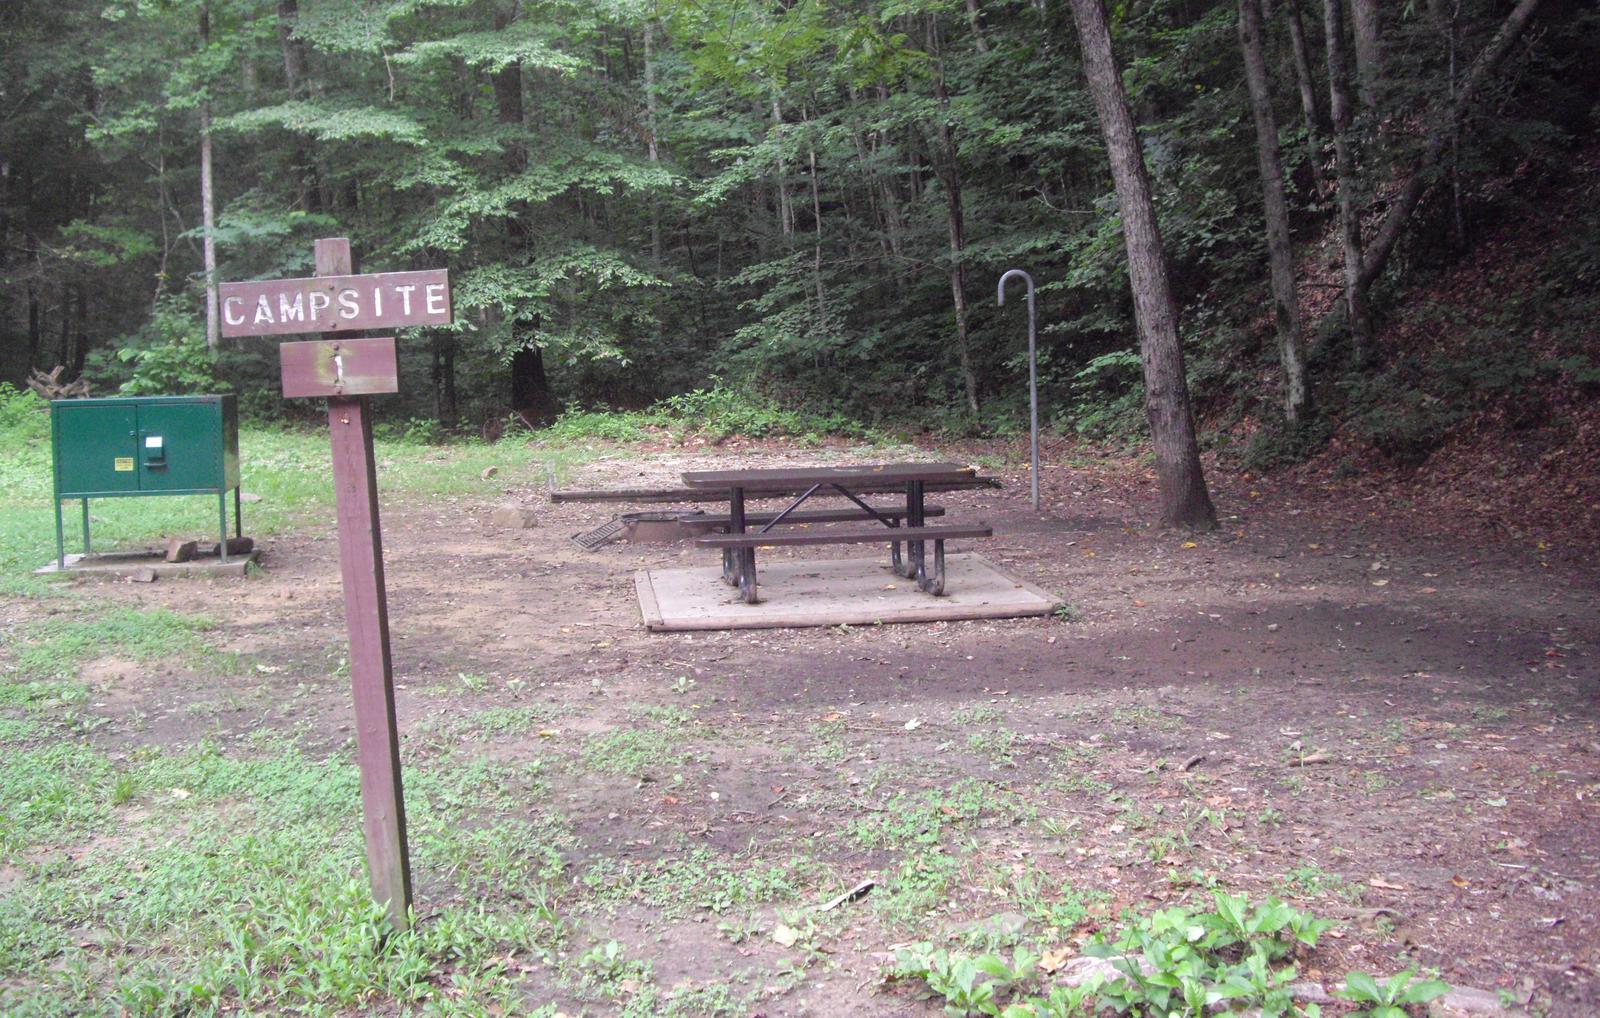 Picnic table sits on concrete pad near a green food storage locker. Campsite number one at the entrance of campground